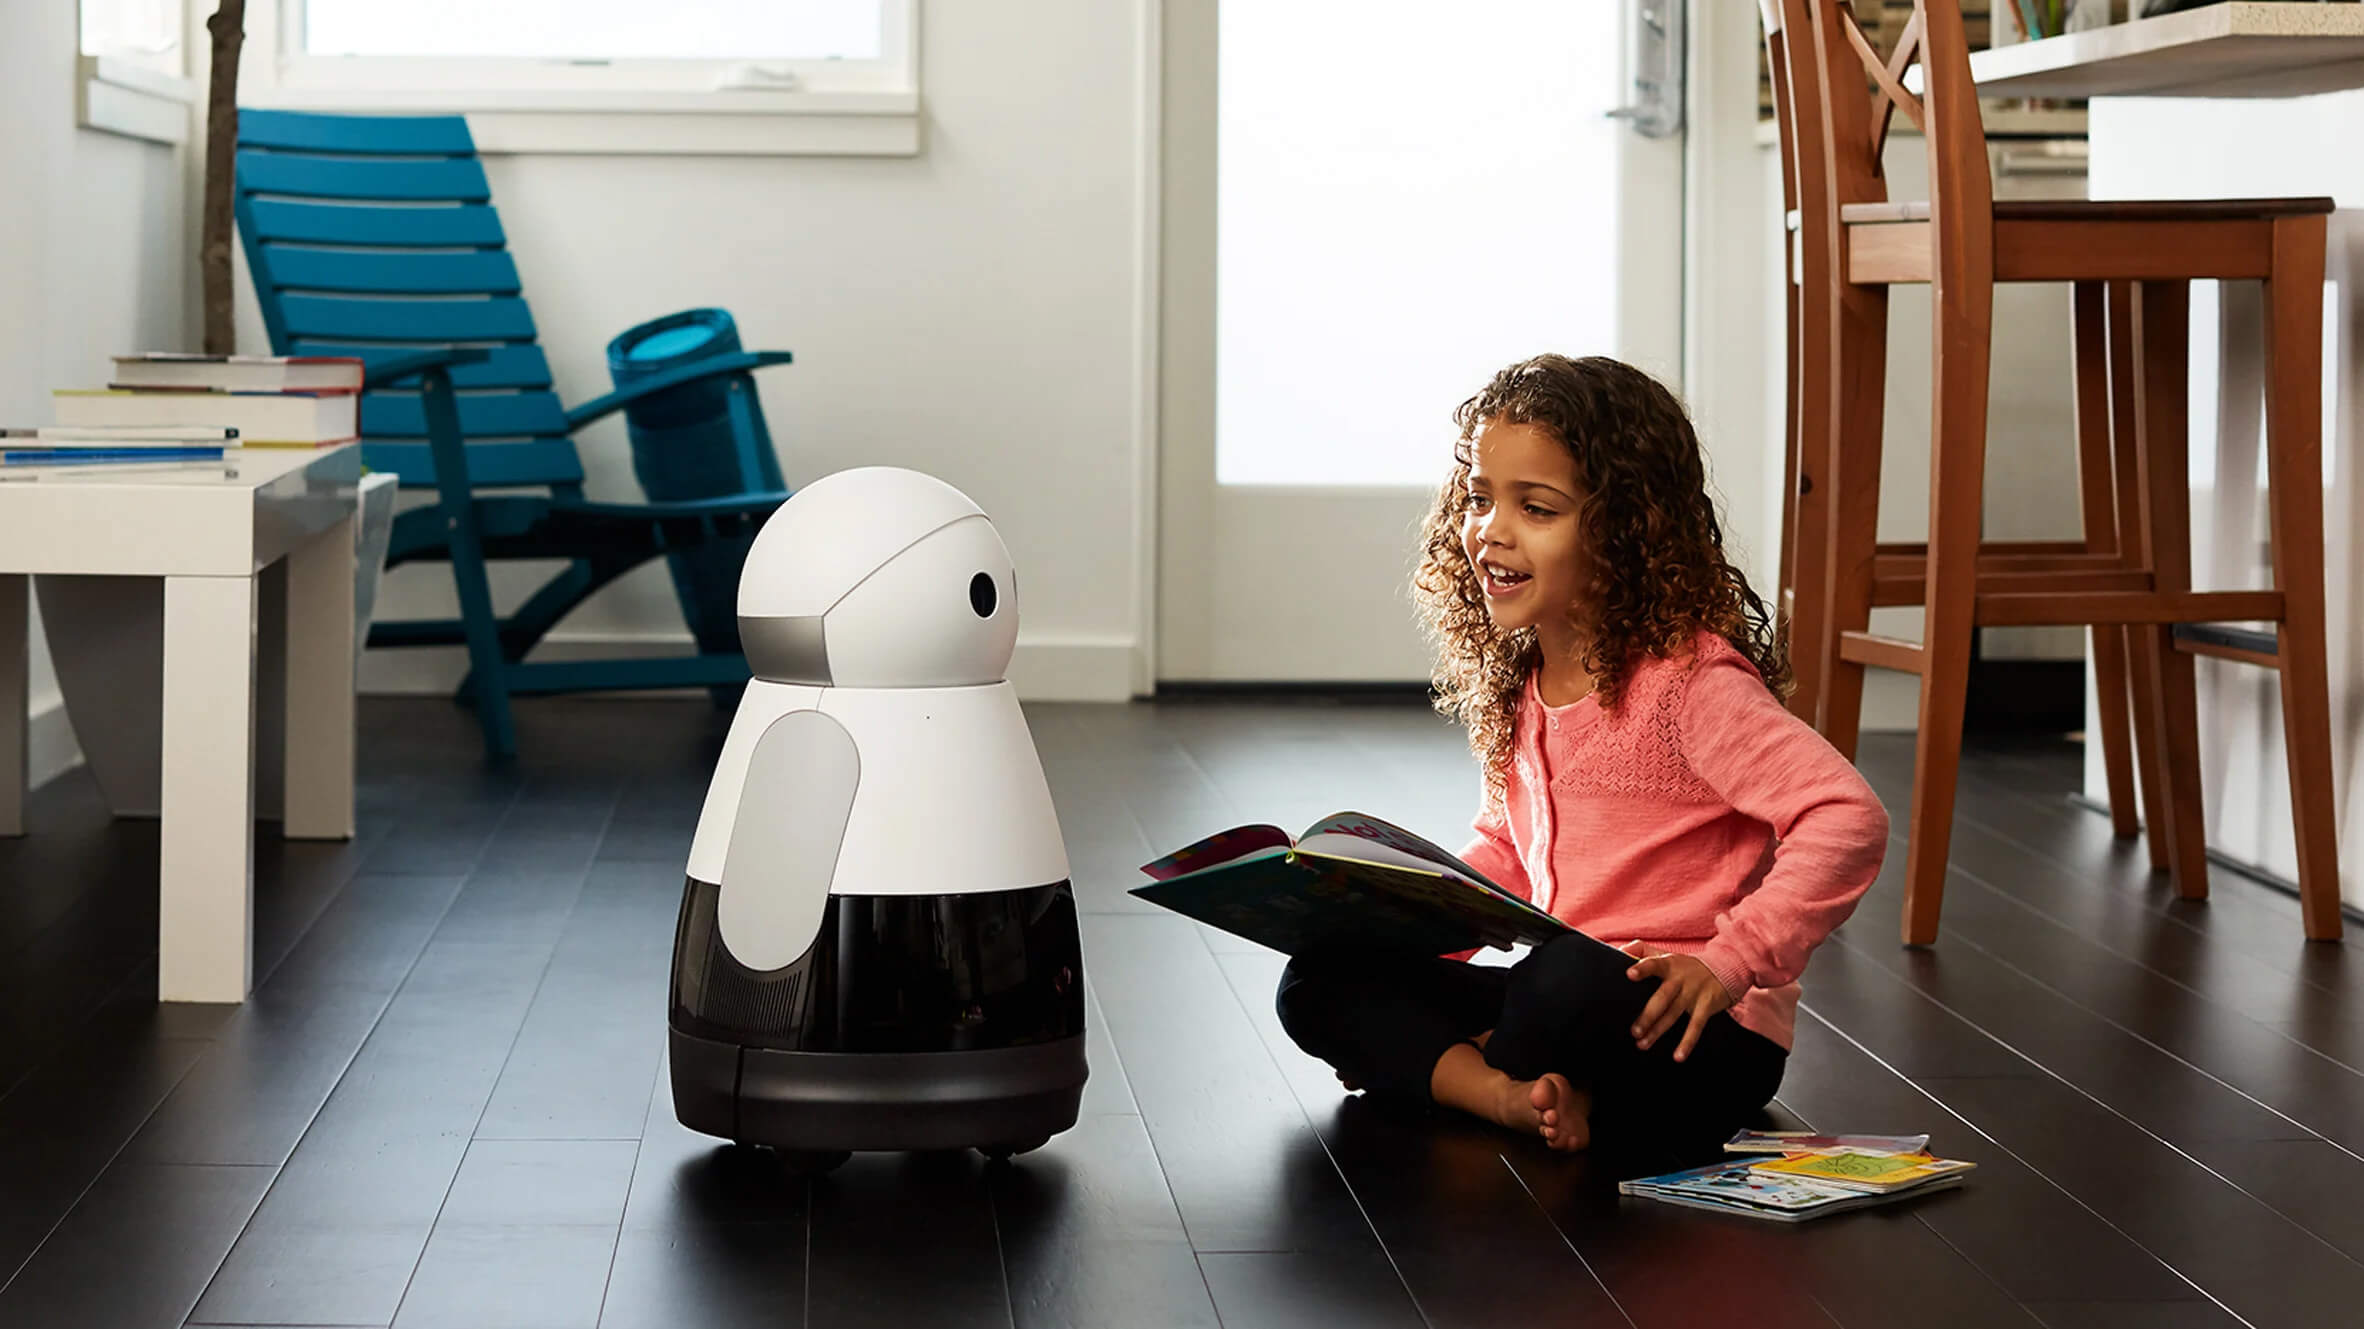 A young girl sitting on the floor reading a book to Kuri the robot companion in a modern living space.